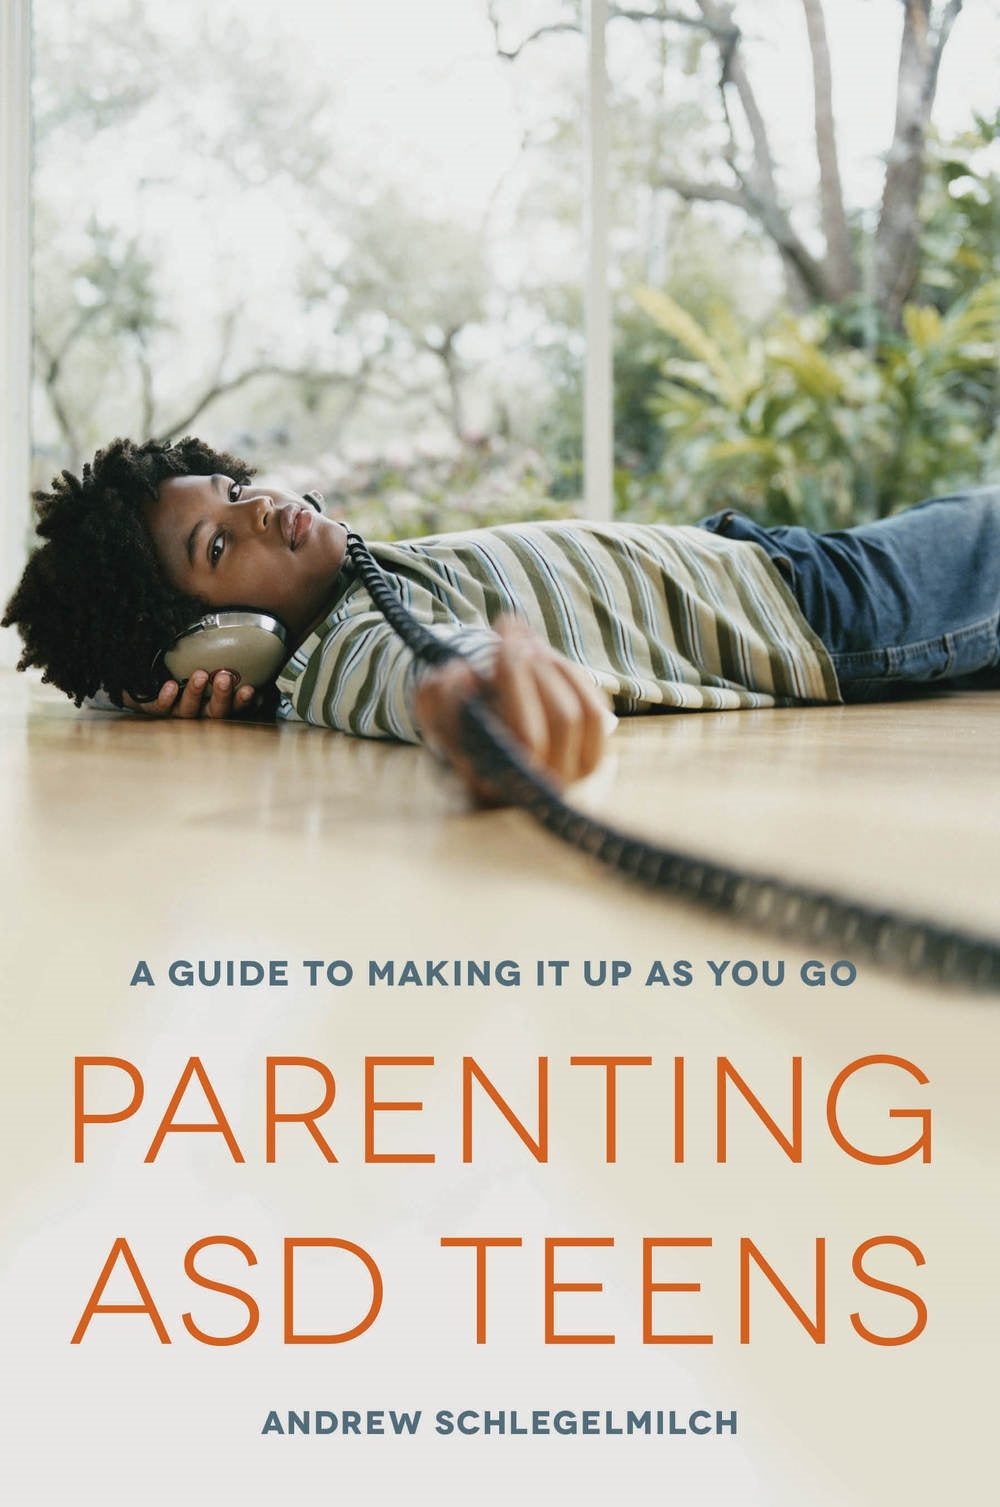 Parenting ASD Teens by Andrew Schlegelmilch